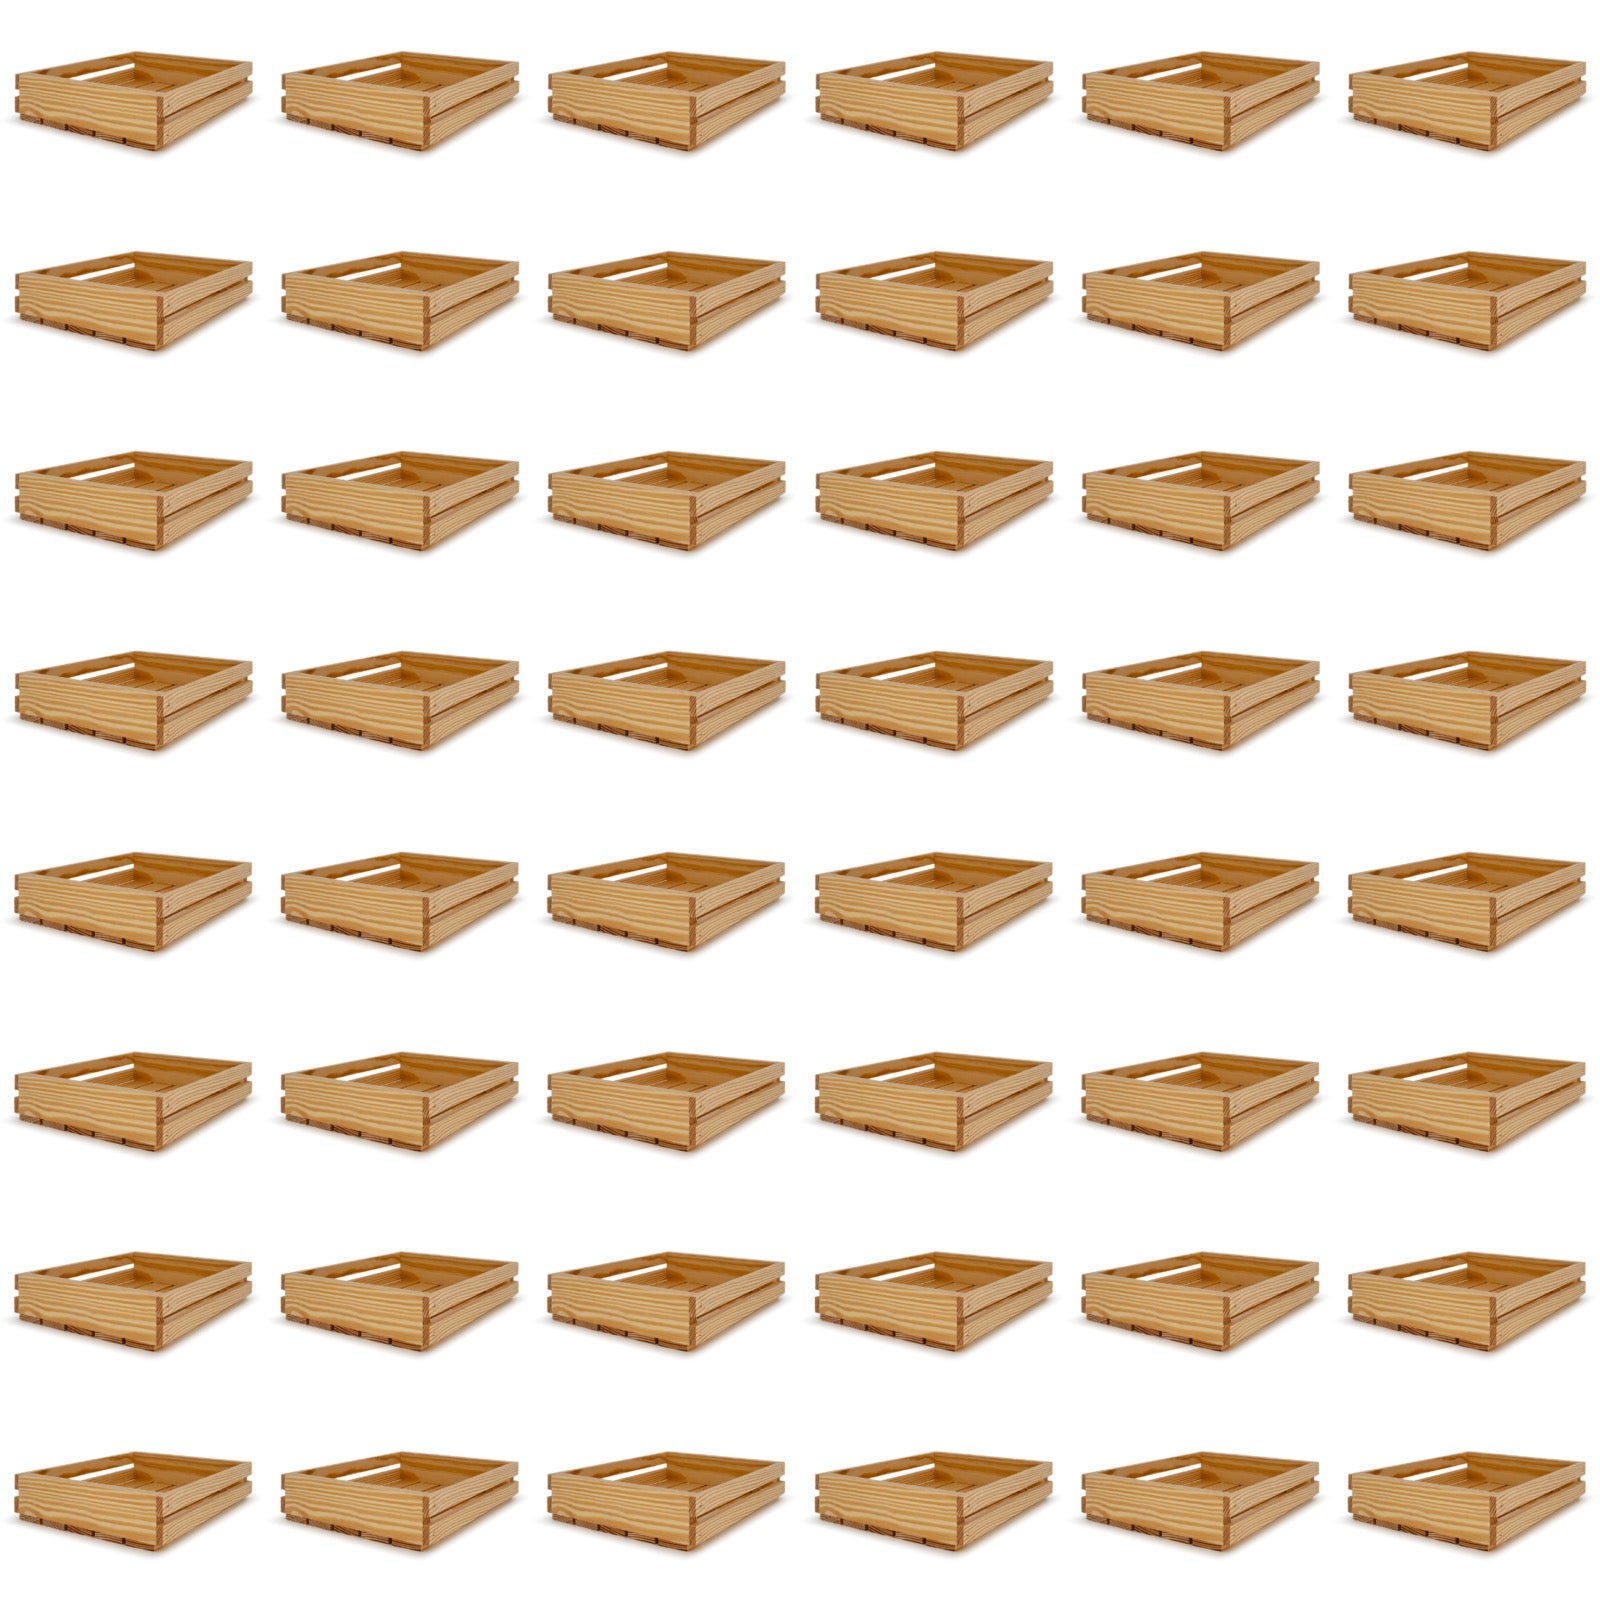 48 Small wooden crates 12x10x2.5